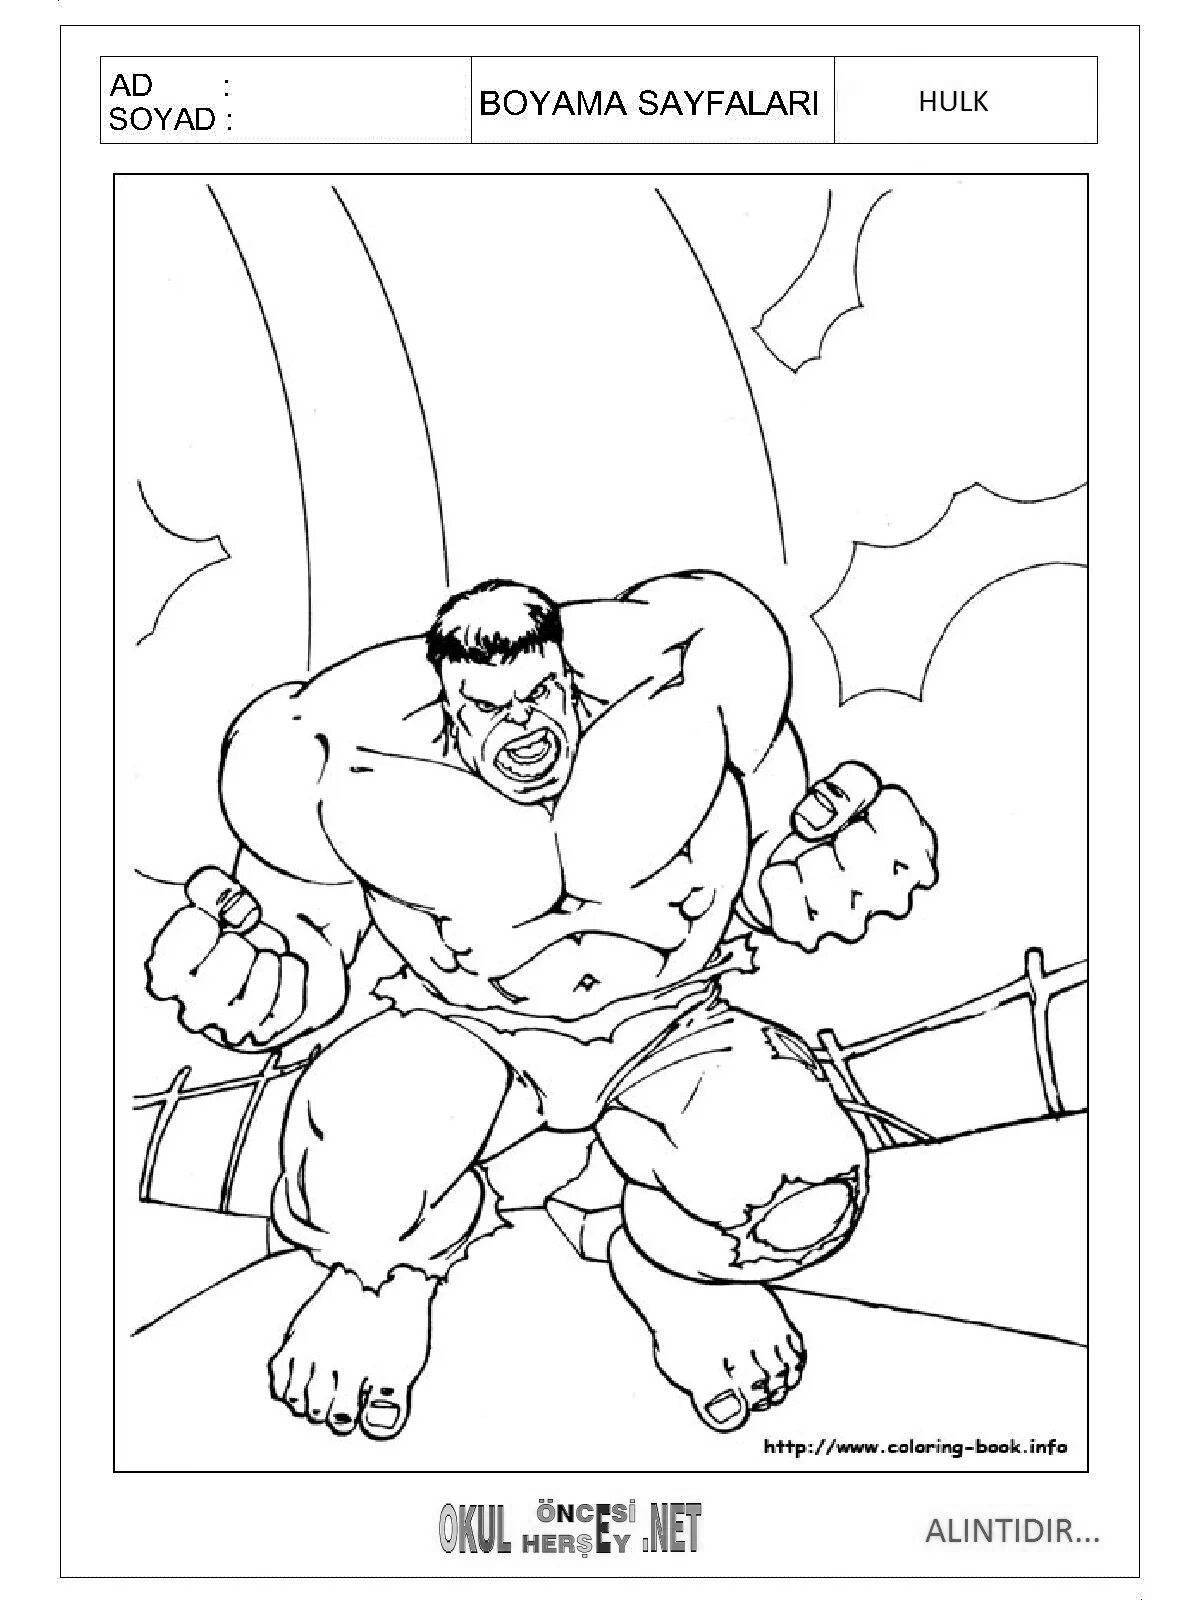 Hulk coloring book for children 5-6 years old